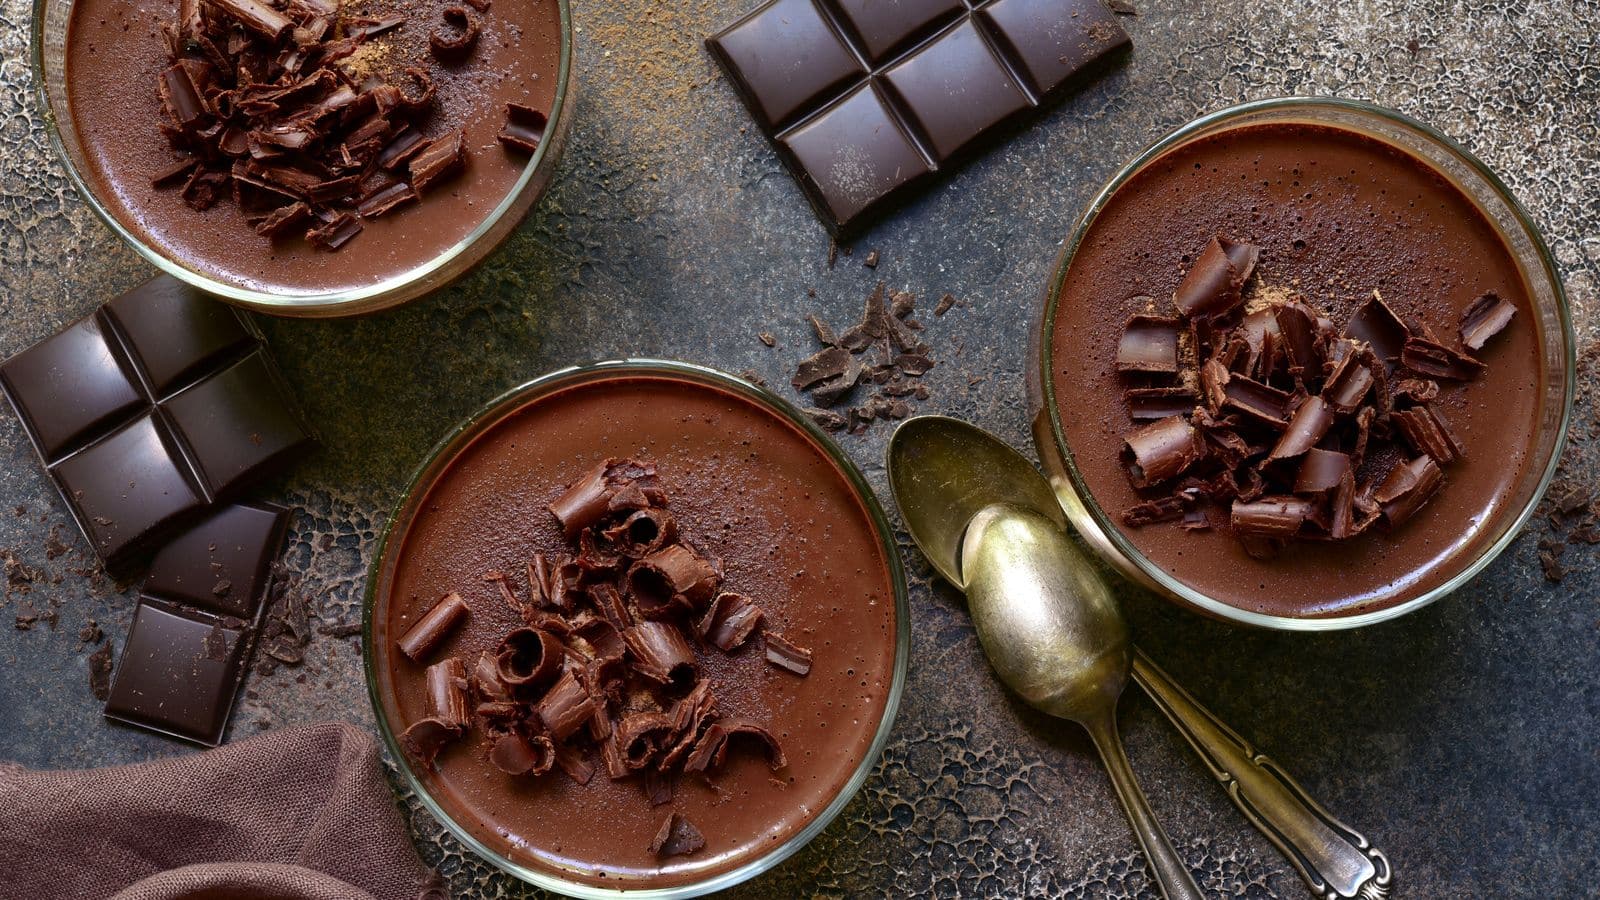 Recipe: Whip up this delicious Belgian chocolate mousse